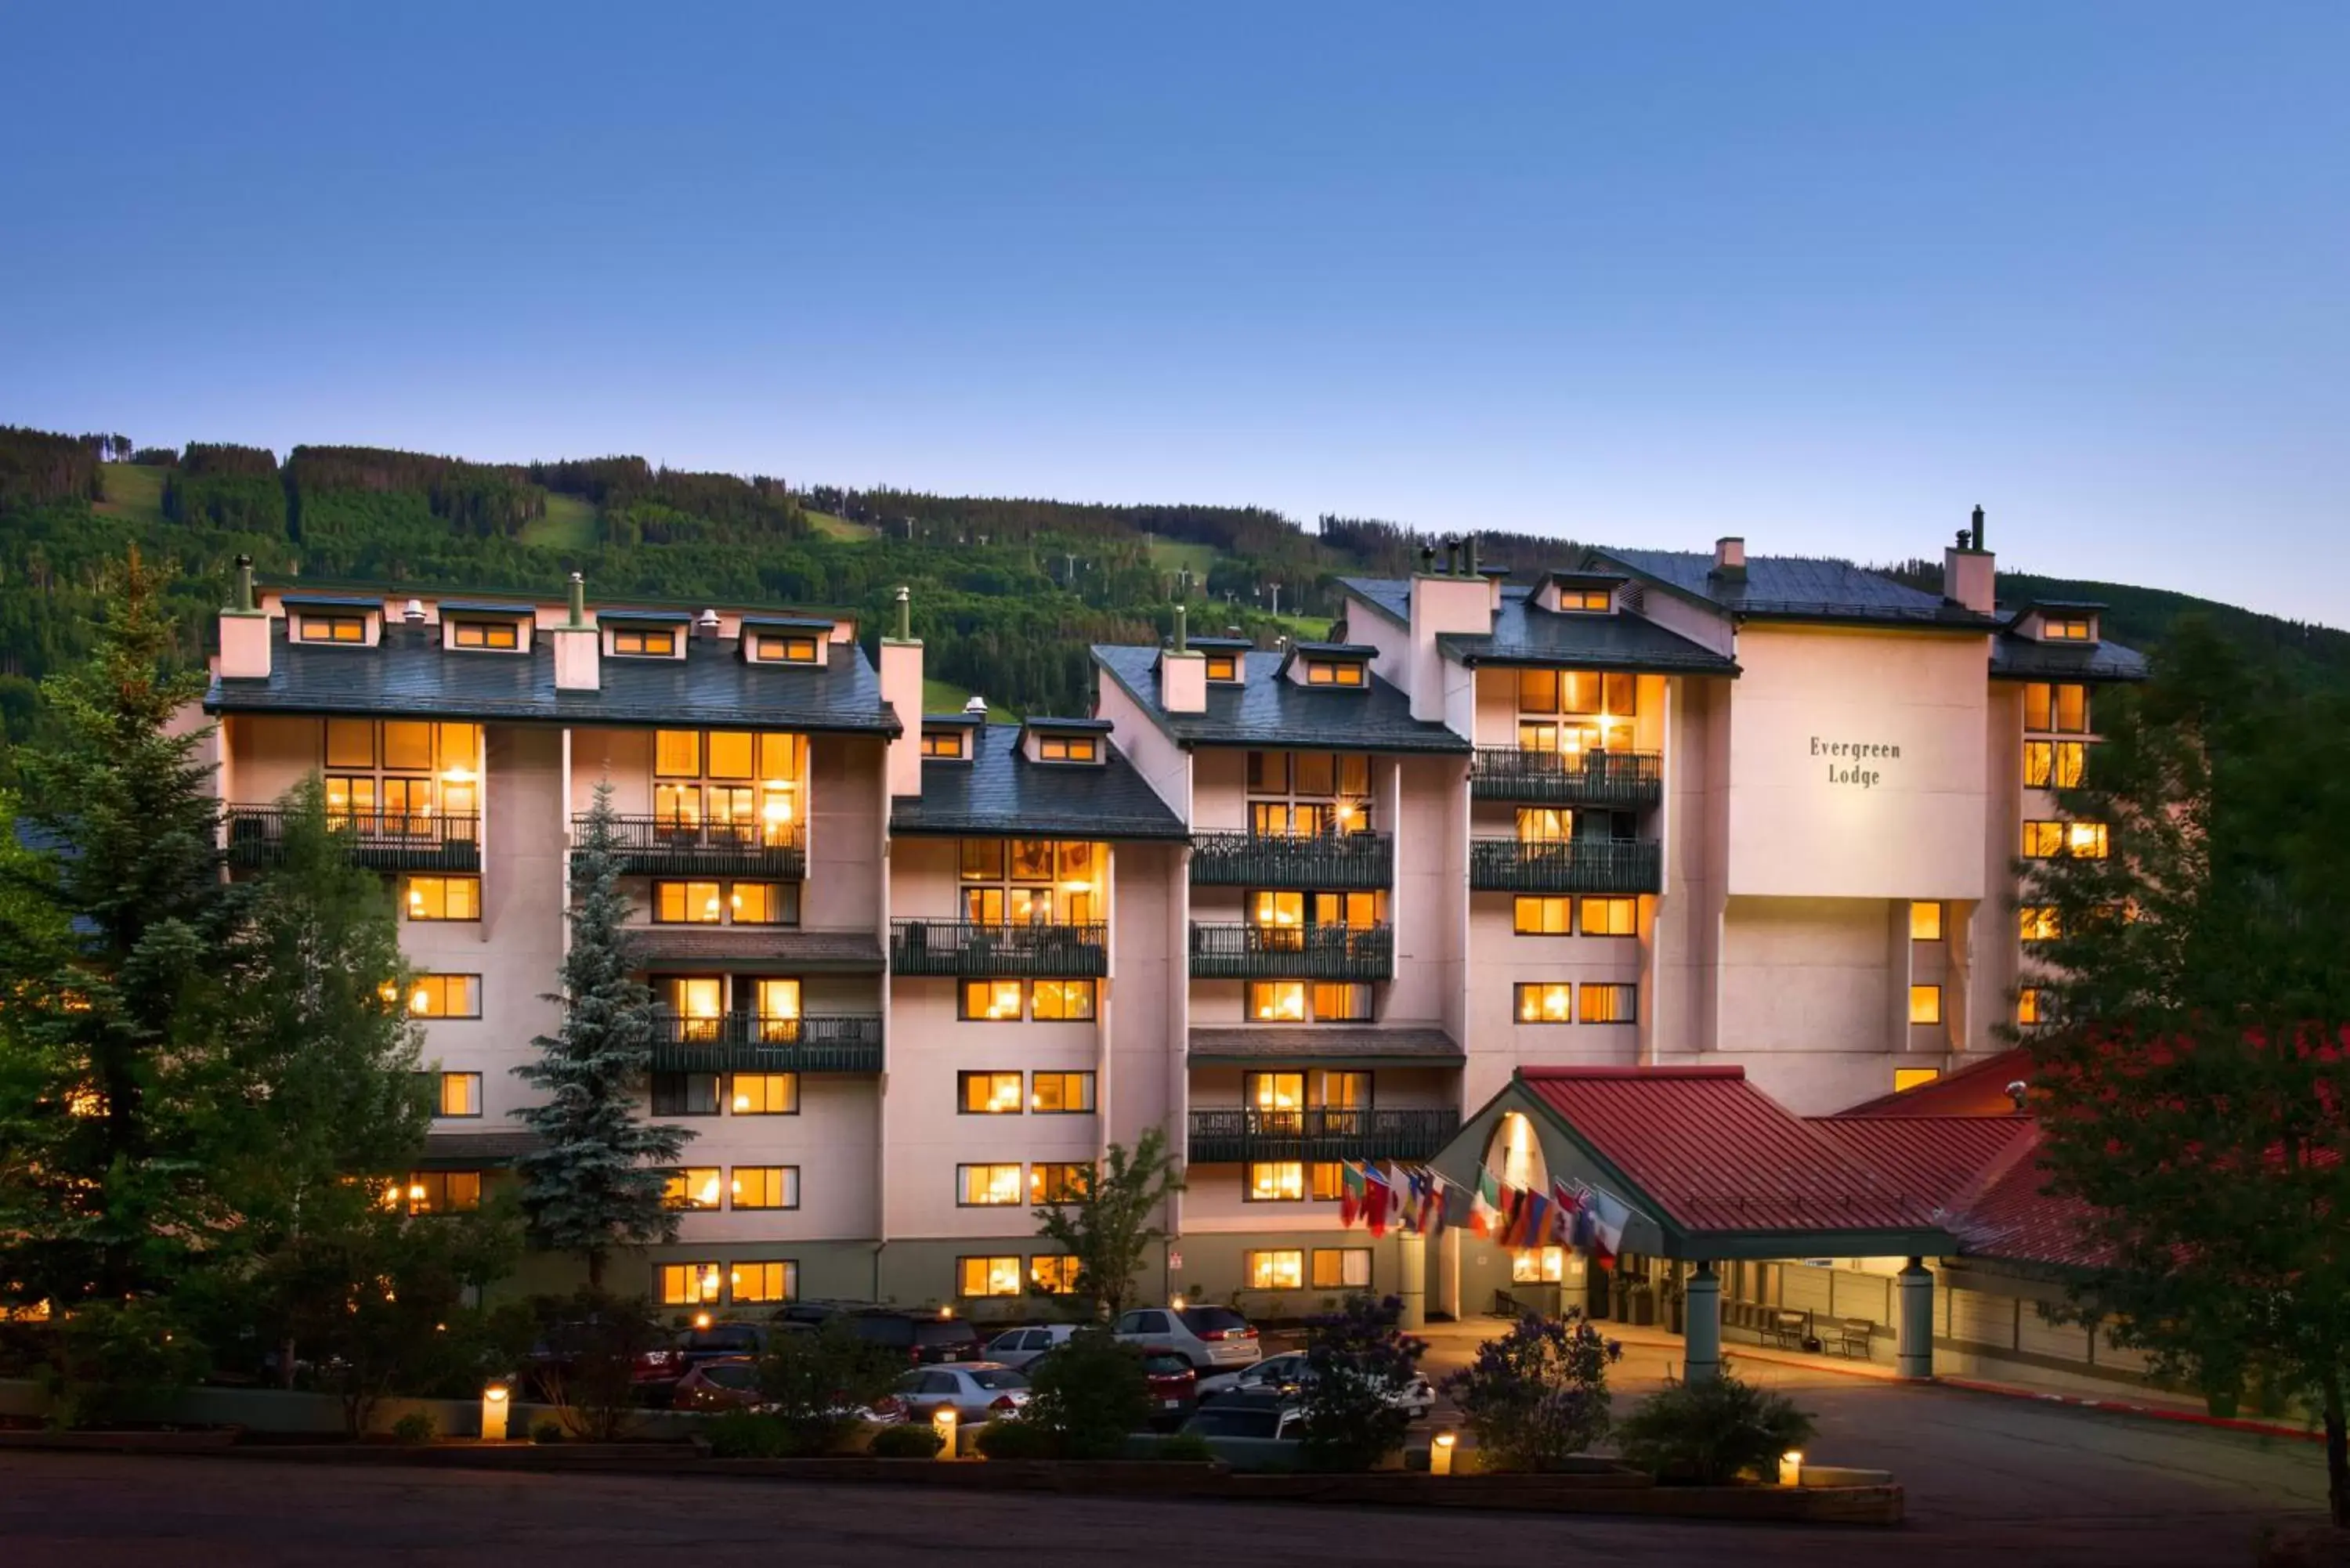 Property building in Evergreen Lodge at Vail